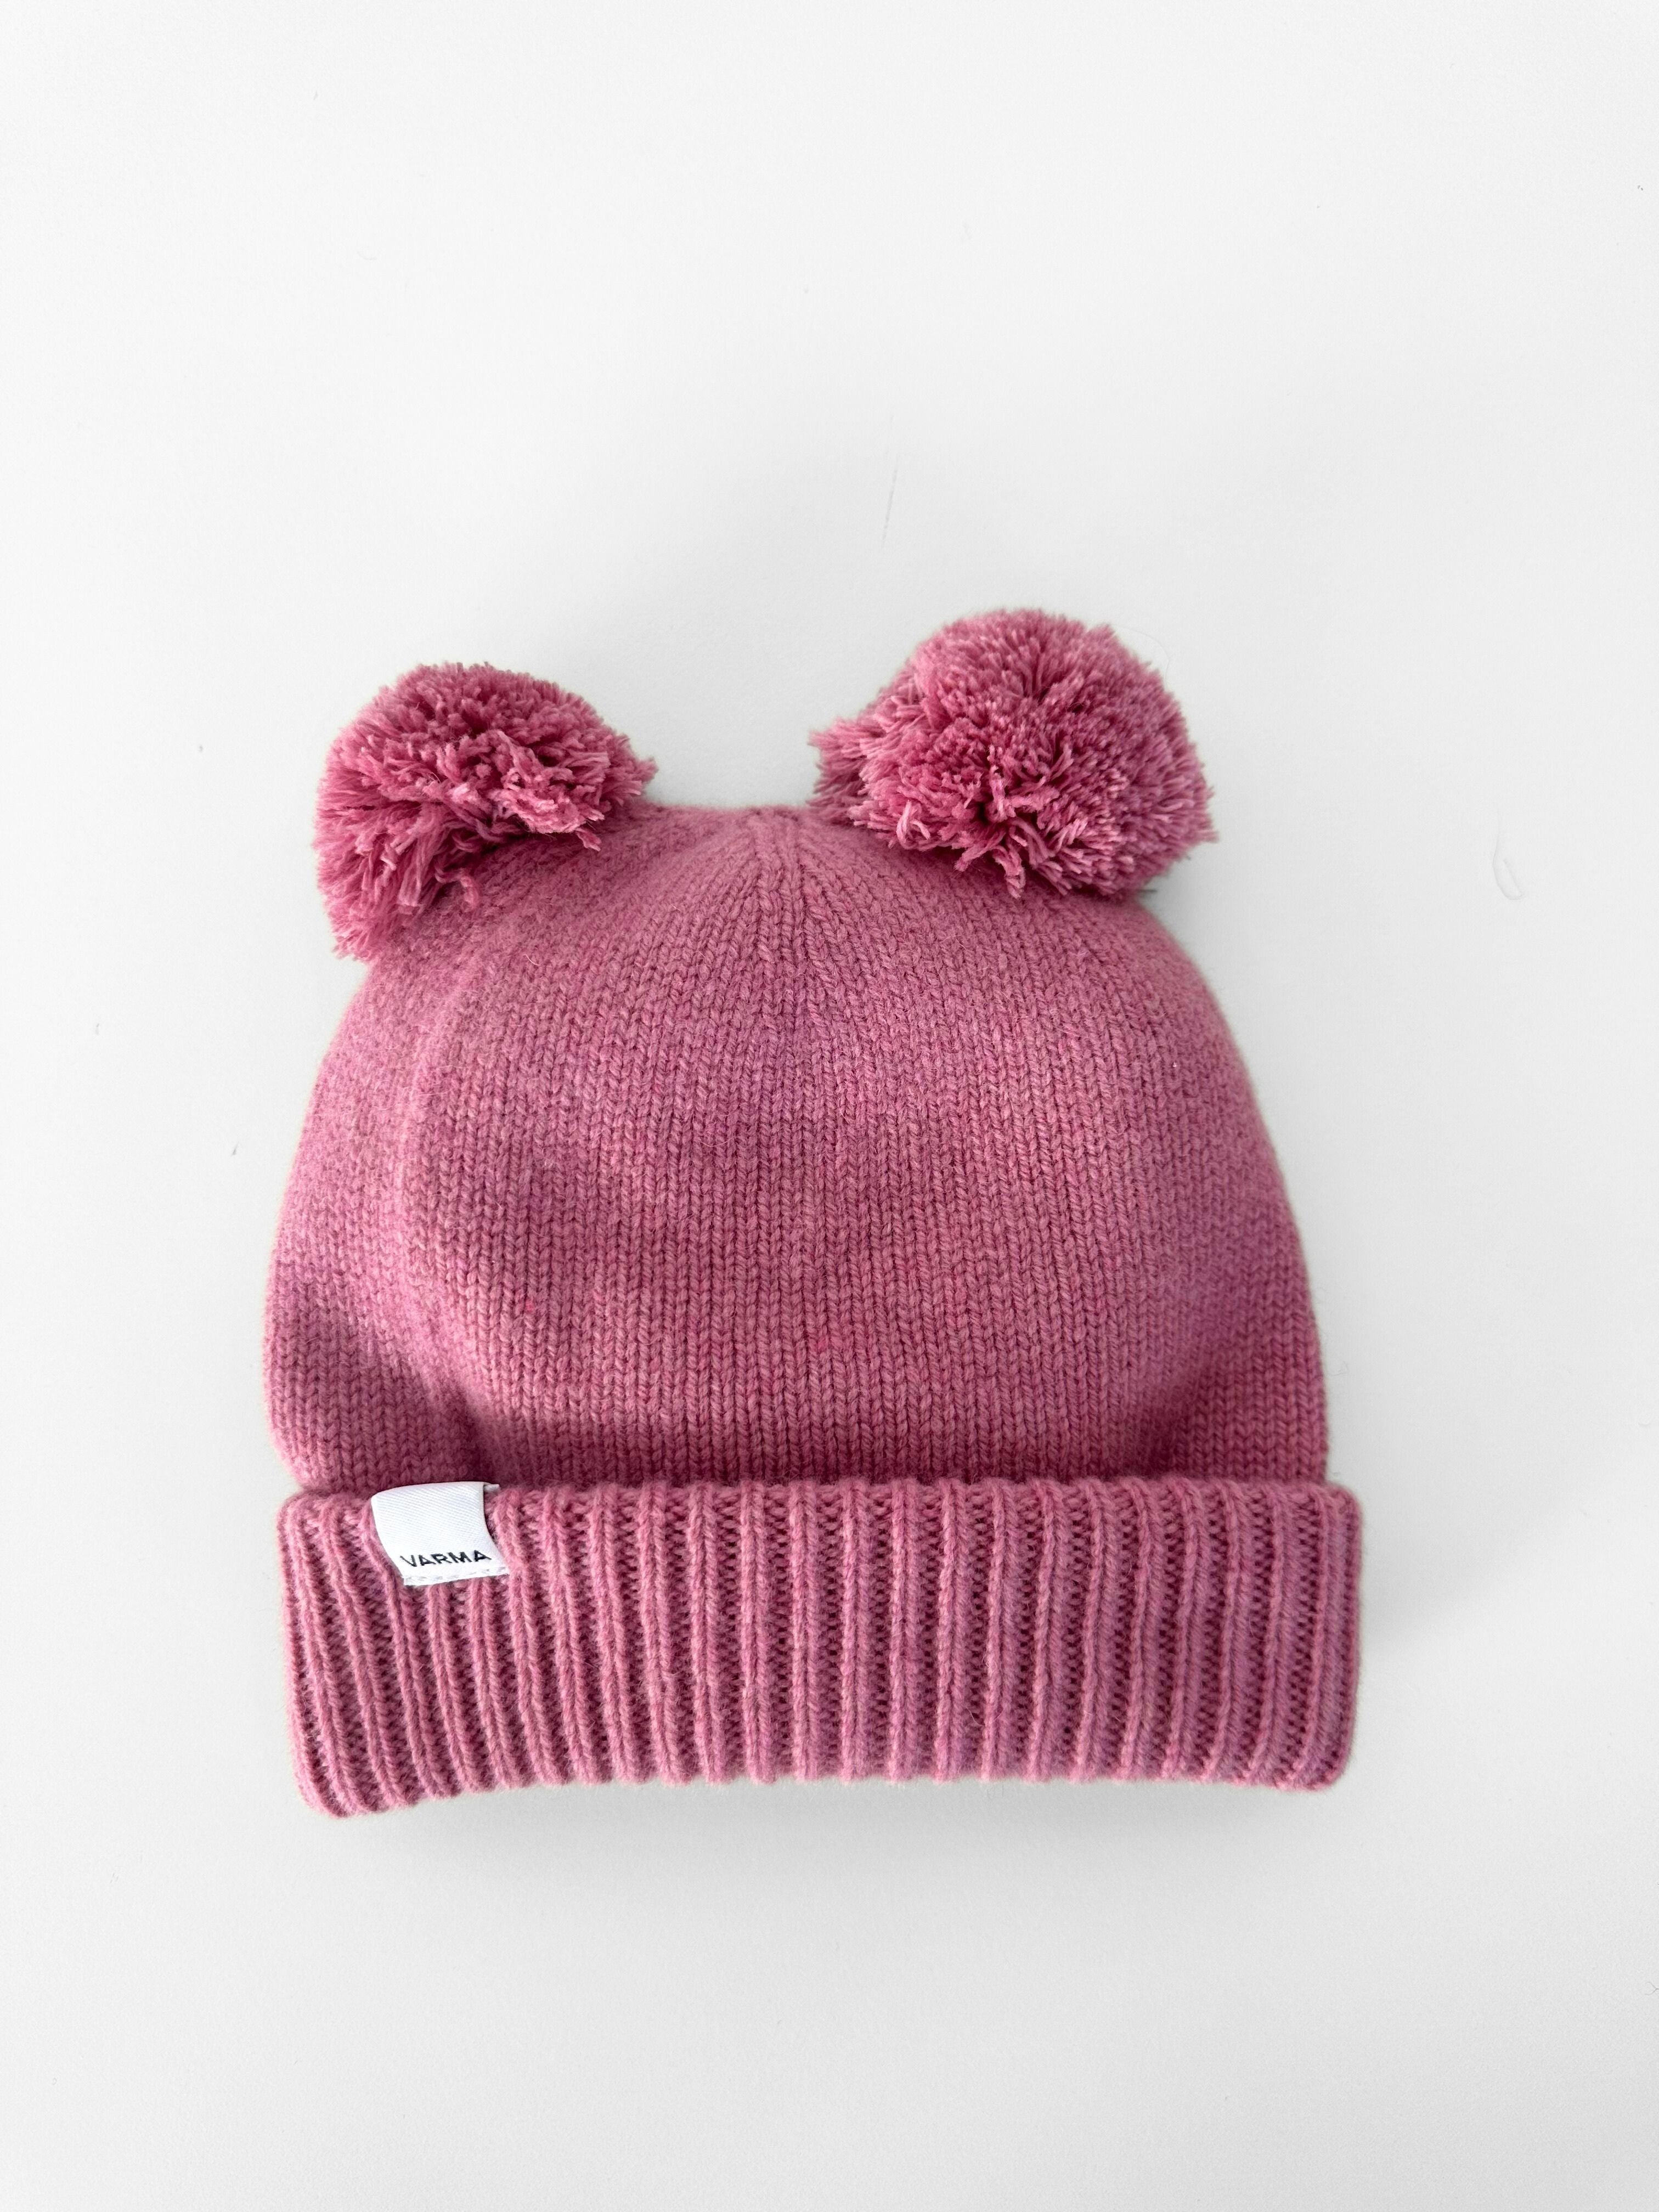 Children's hat with two tassles - Pink